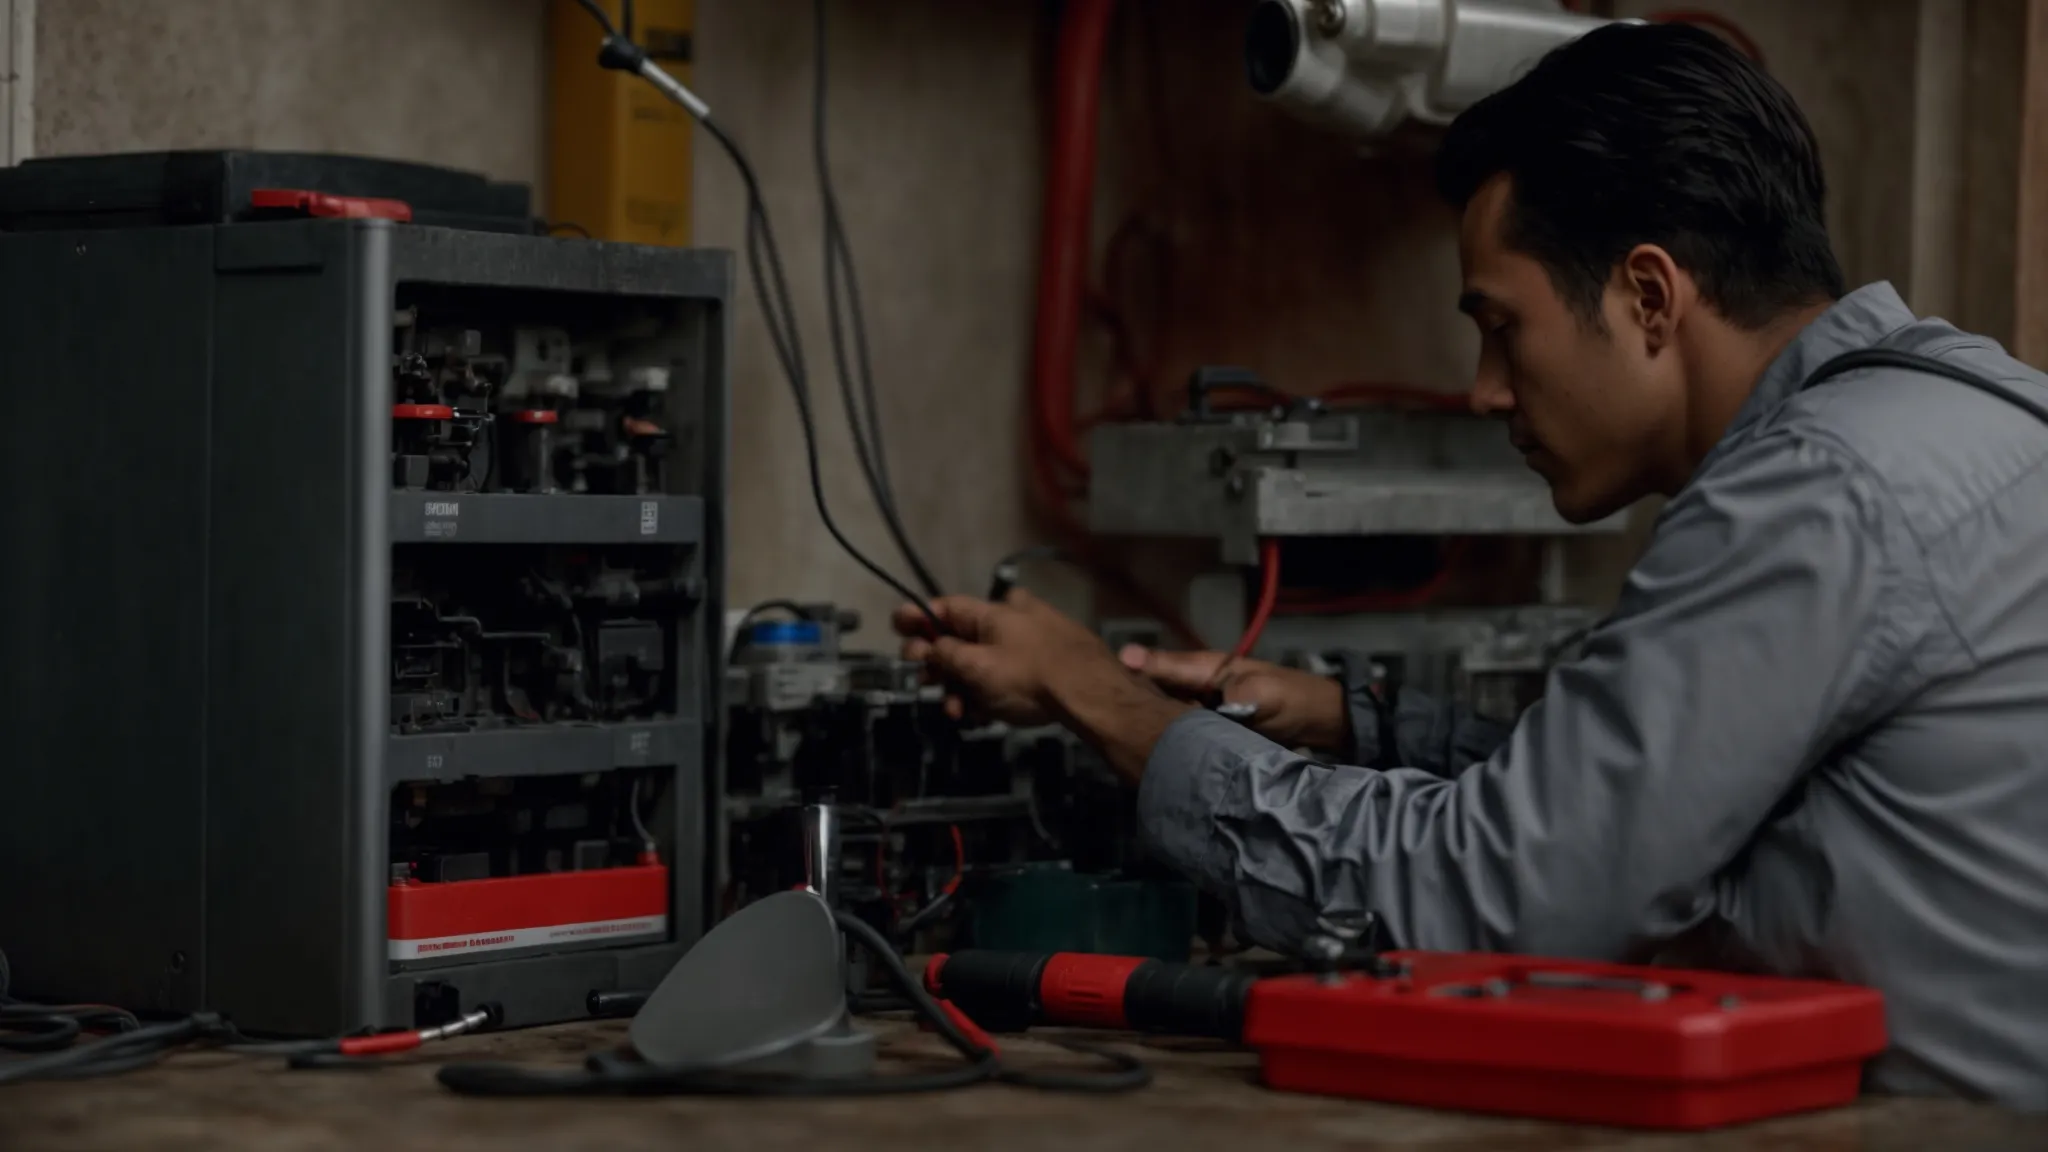 a technician examines a sump pump with a multimeter and a battery nearby on a workbench.